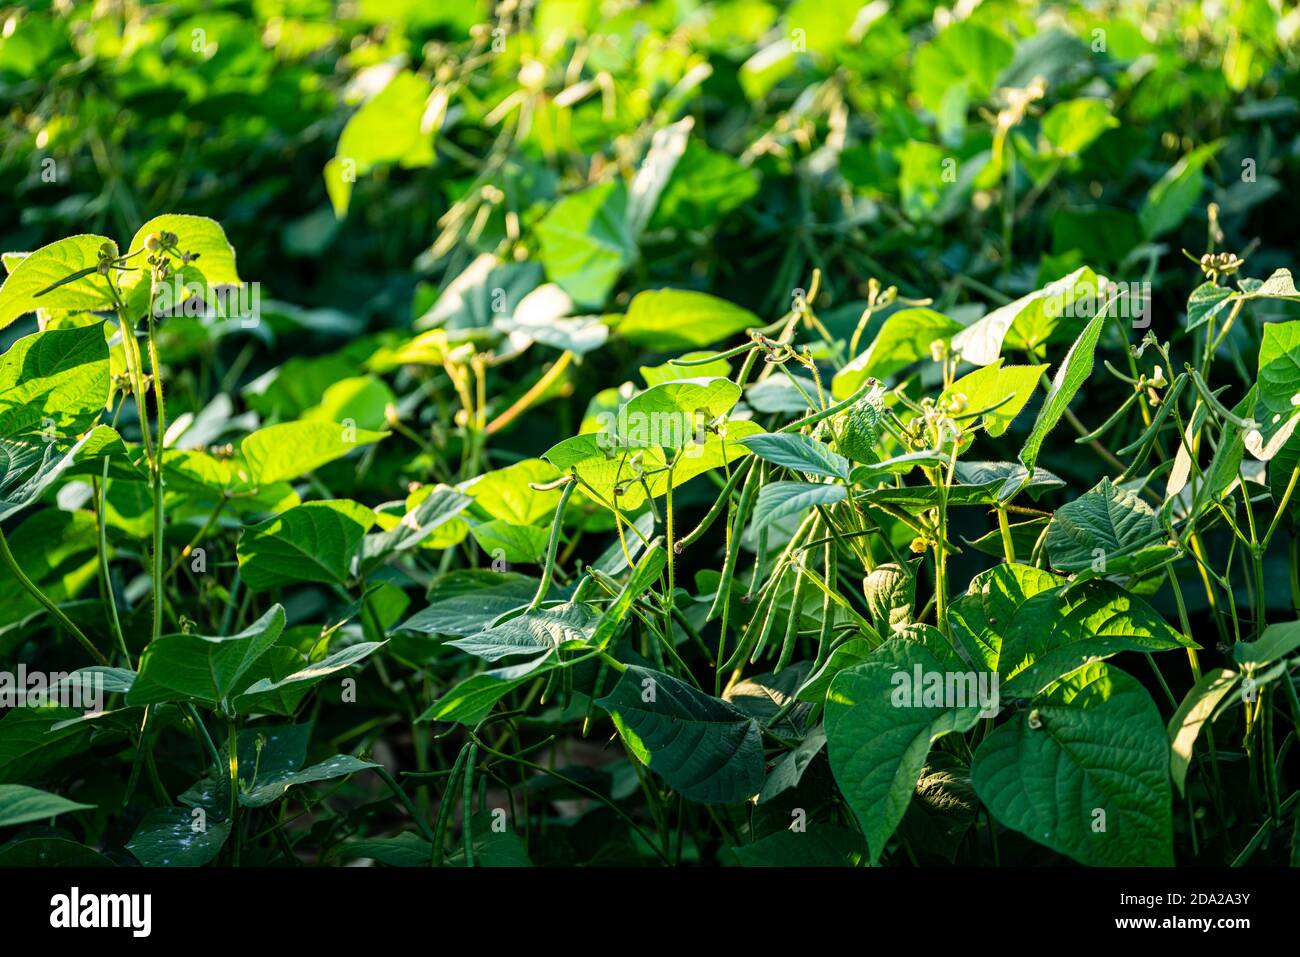 Green soybean field in sunny summer weather. Stock Photo